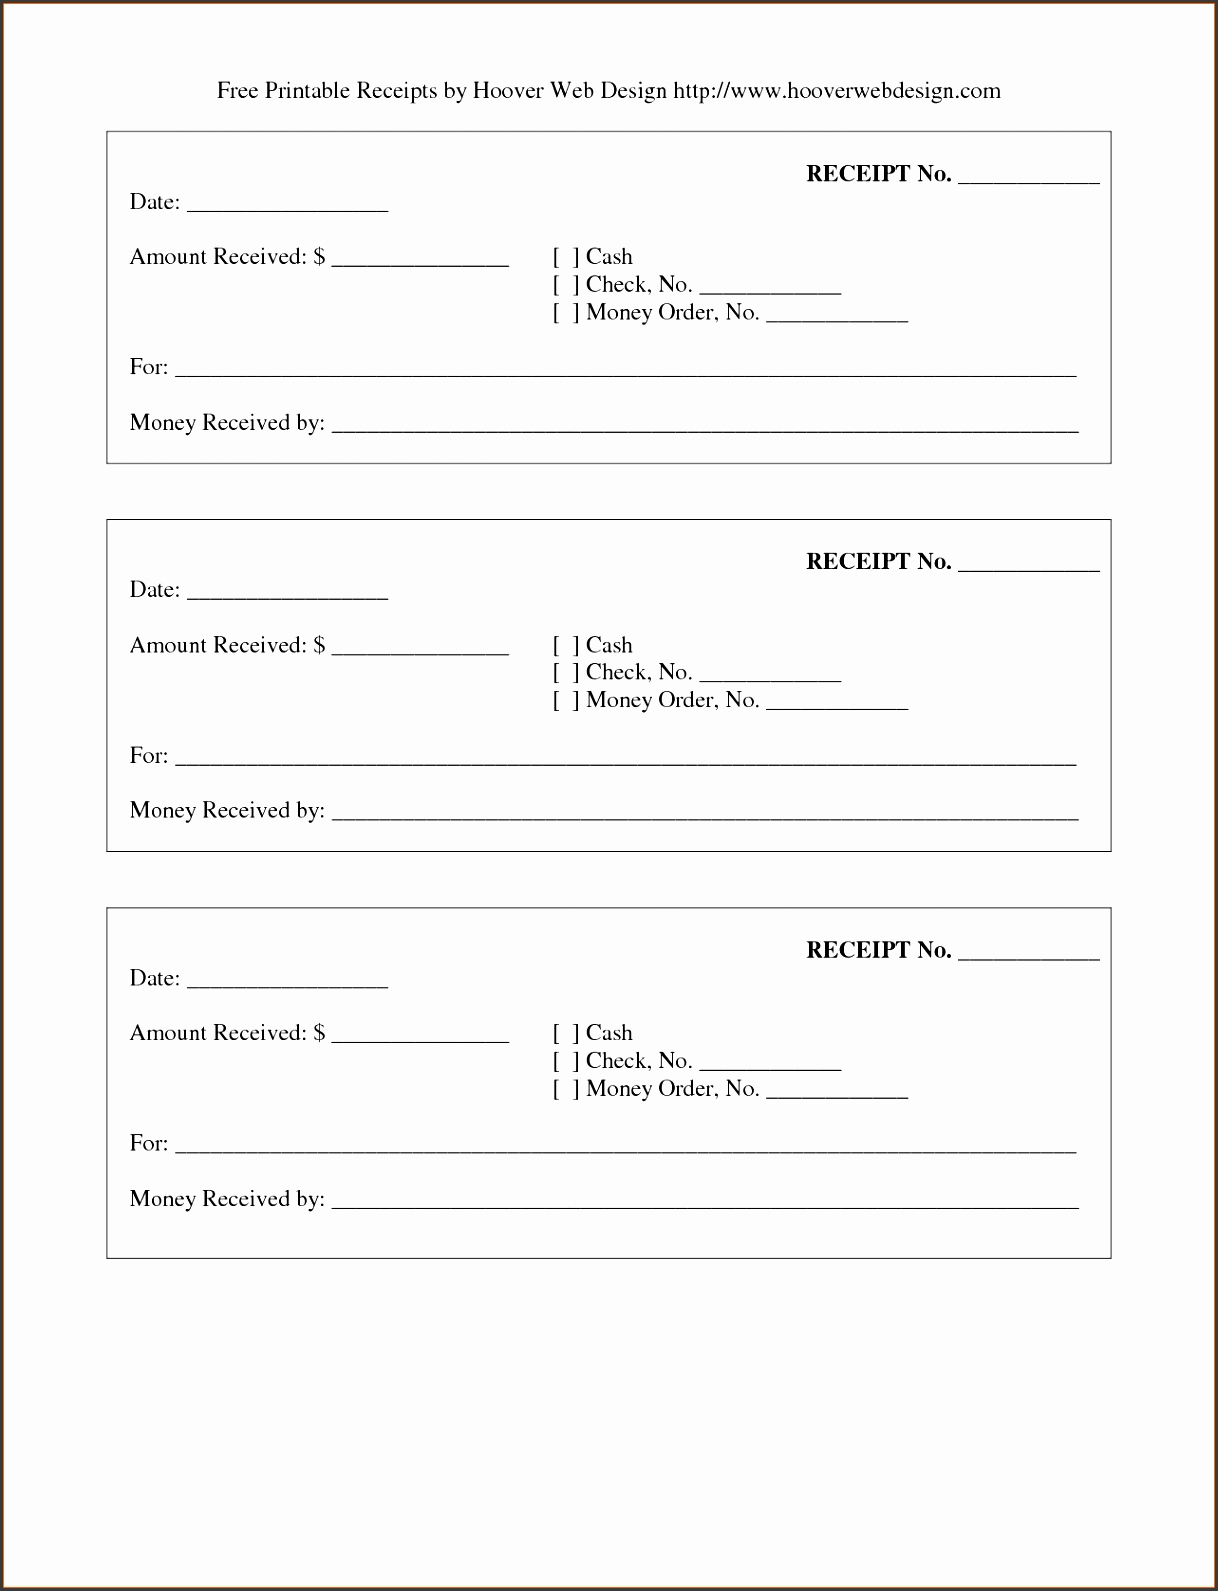 5 Printable Payment Receipt Template – Sampletemplatess – Sampletemplatess Within What Is A Template In Word